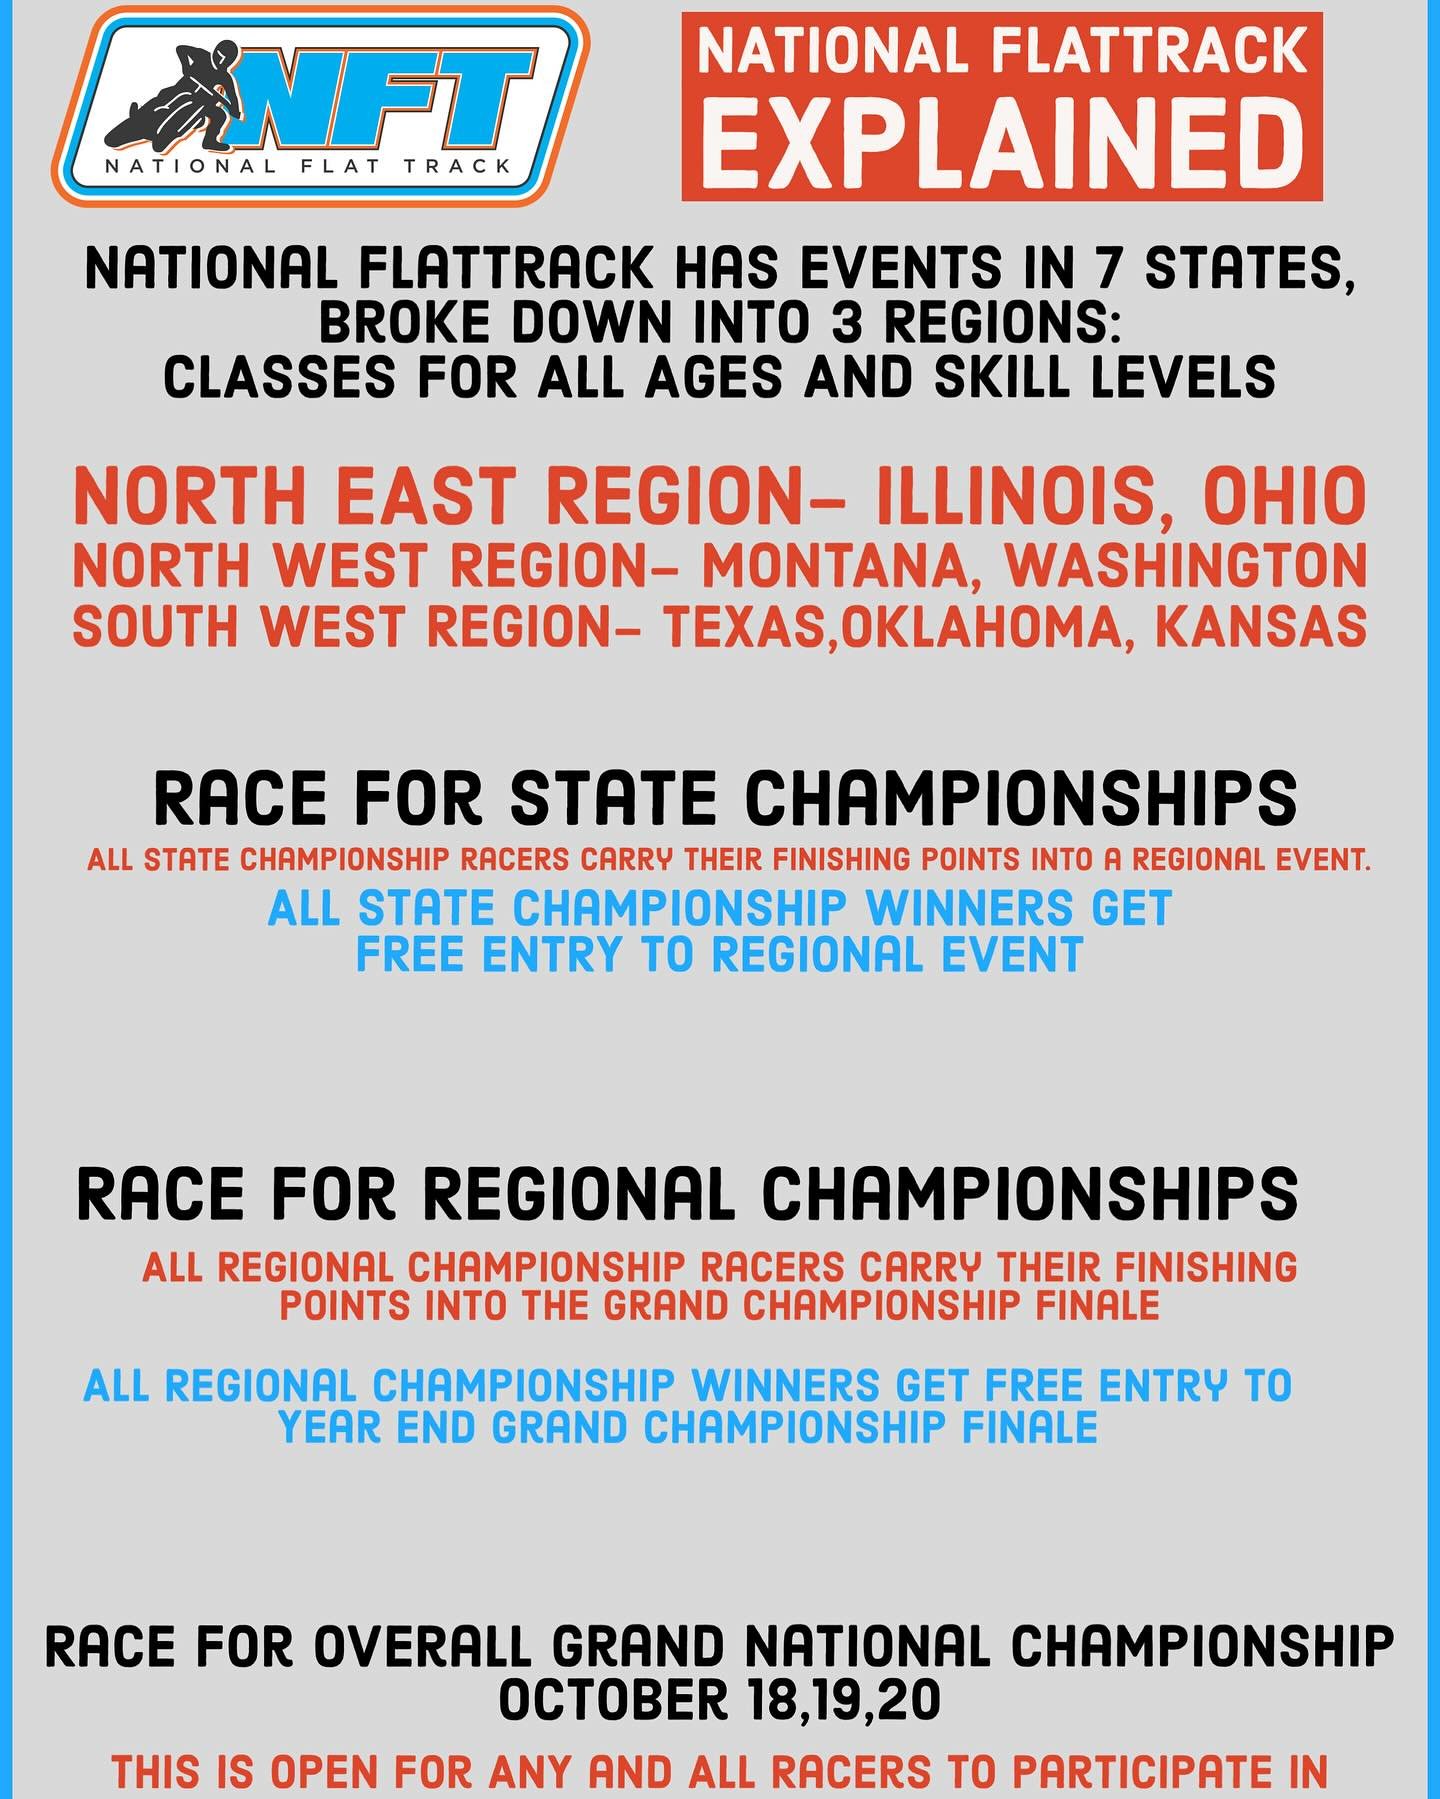 National Flattrack Explained
Things are starting to heat up! 🔥  Key notes:
State Championship points carry over to the Regional. State Champions get free entry to Regional. Regional points carry over to Championship finale.  Regional Champions get f